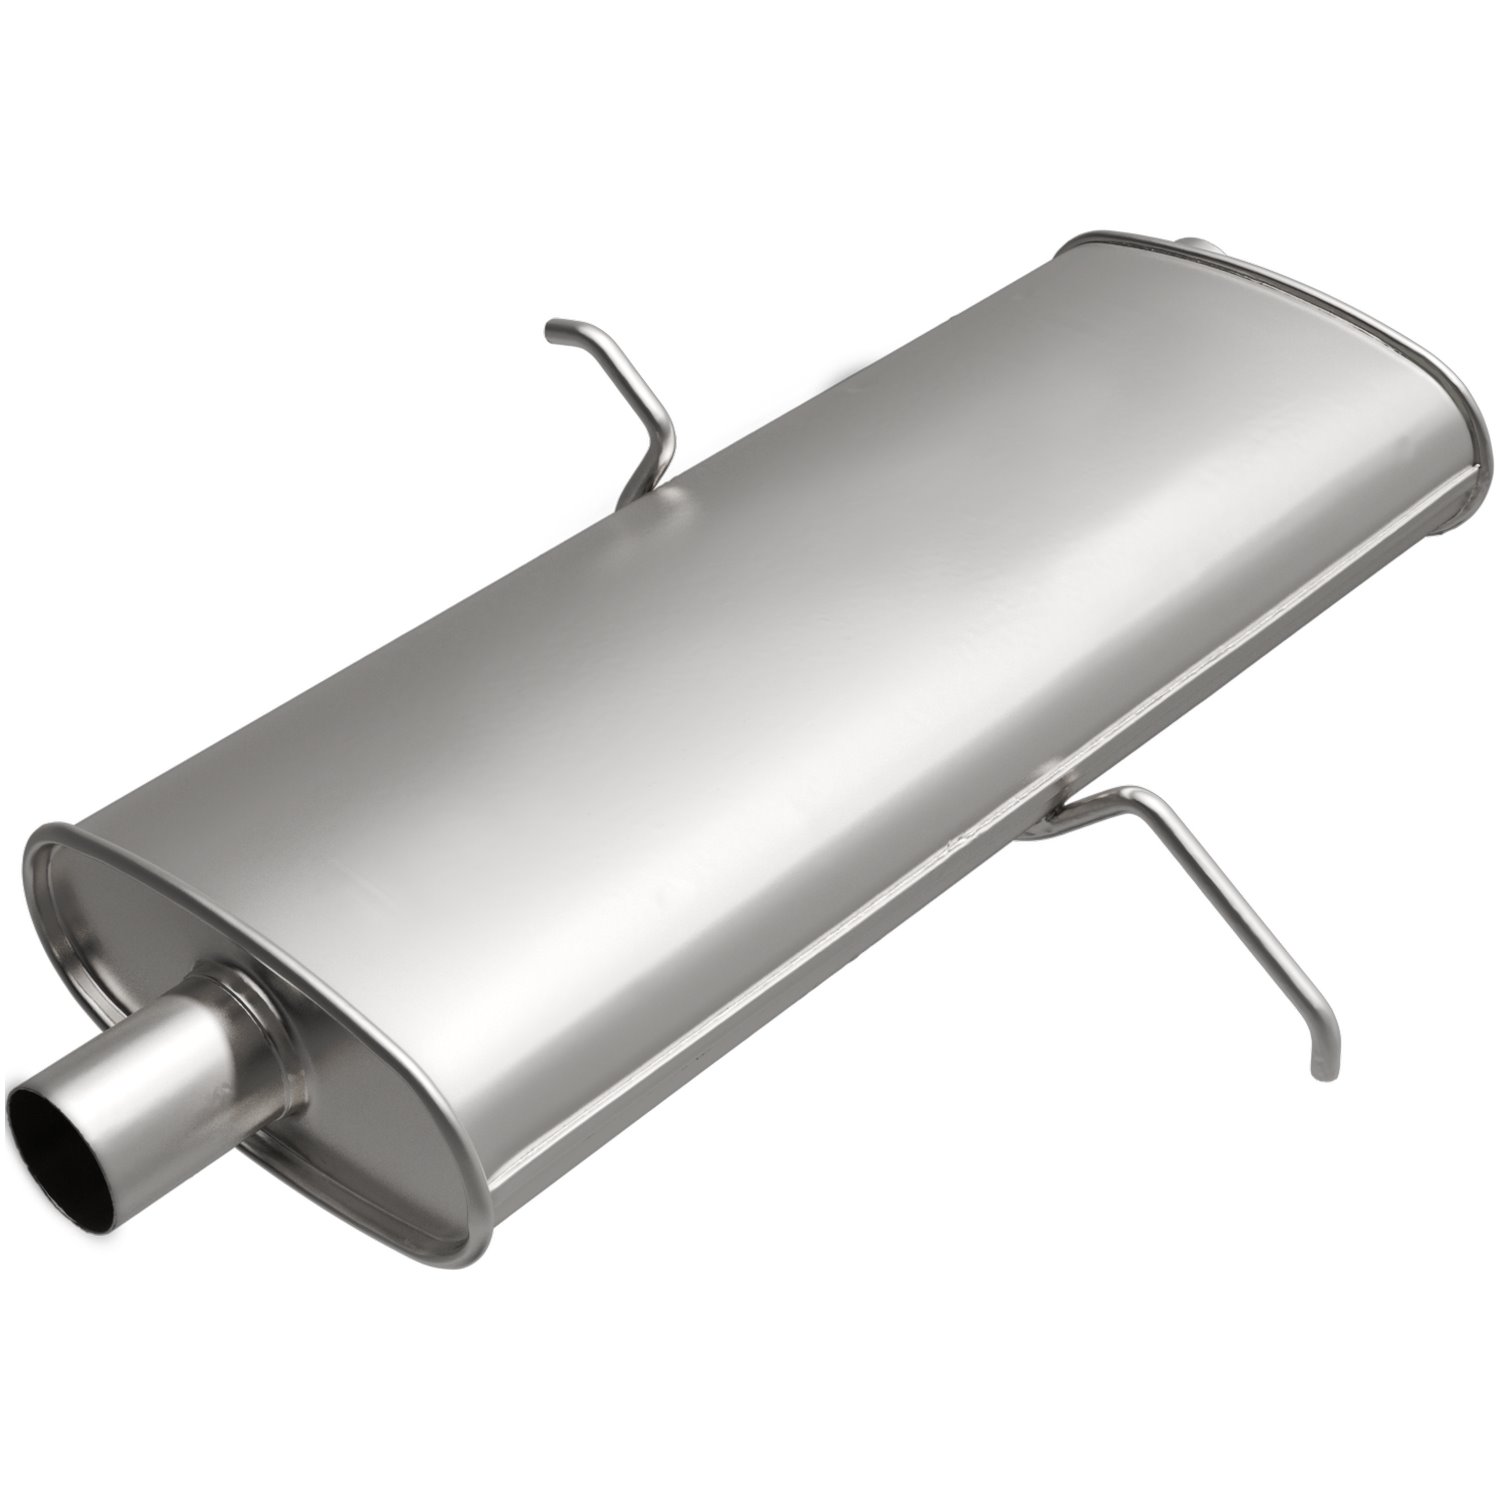 Direct-Fit Exhaust Muffler, 2001-2007 Dodge Grand Caravan/Town and Country, Voyager